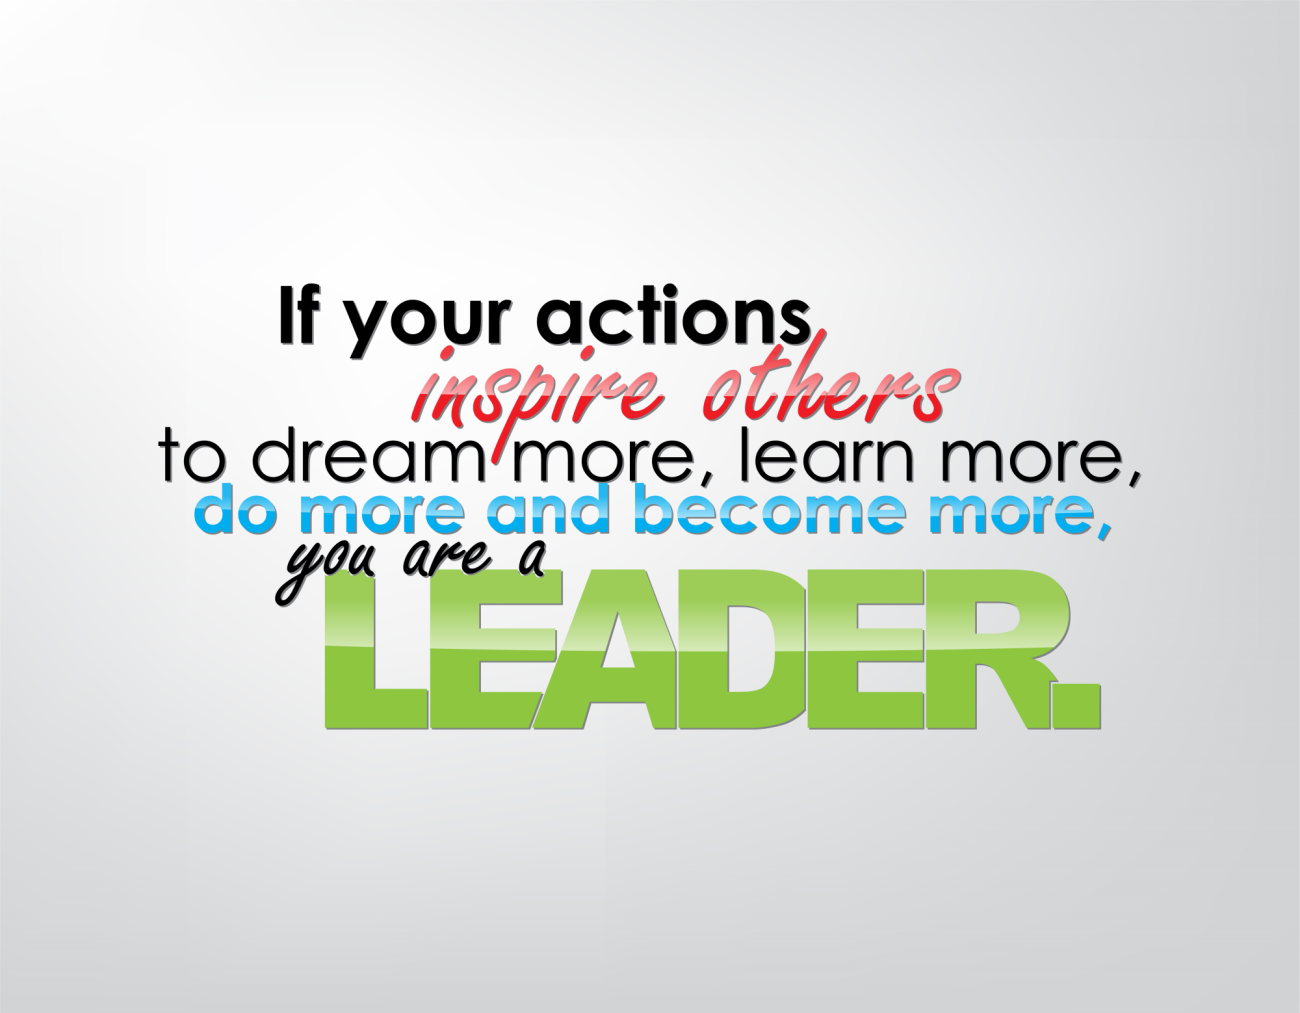 If your actions inspire others to dream more, learn more, do more, and become more, you are a leader.